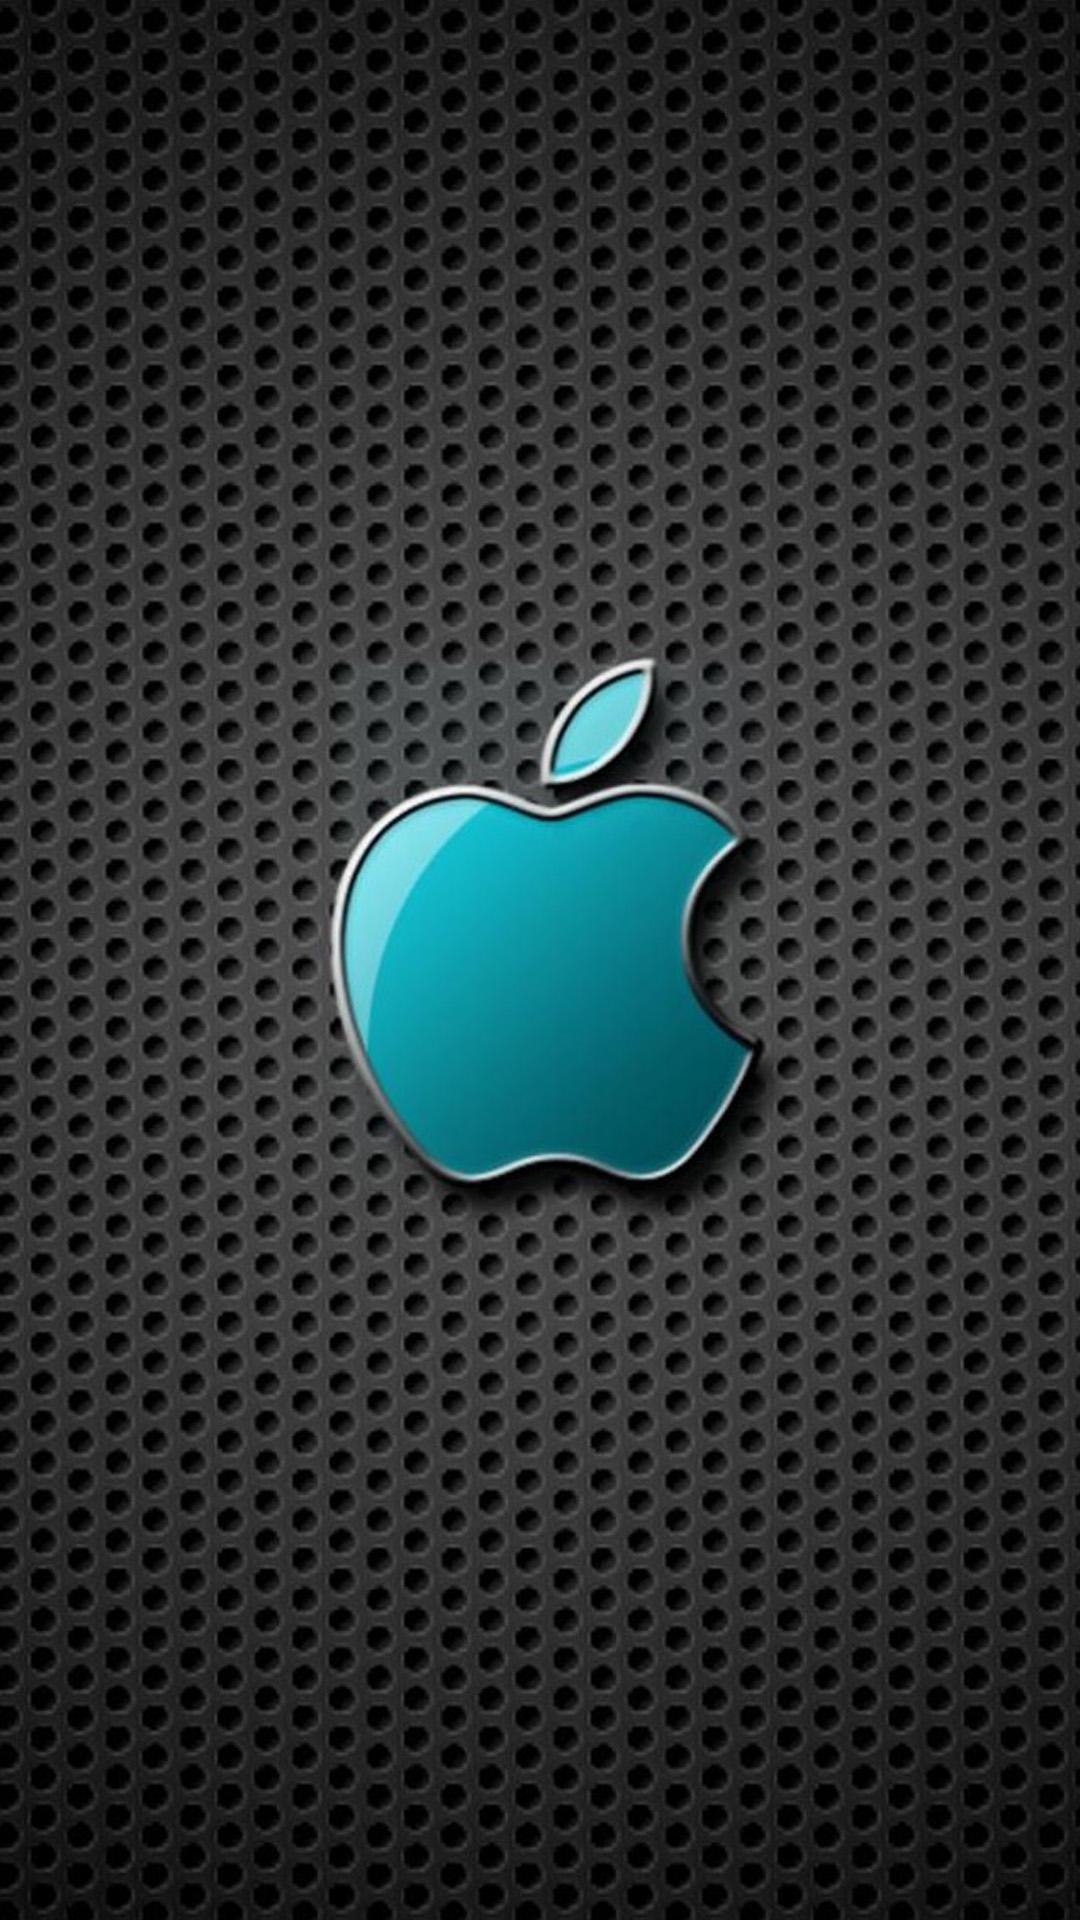 Apple iPhone Wallpaper Download, Picture